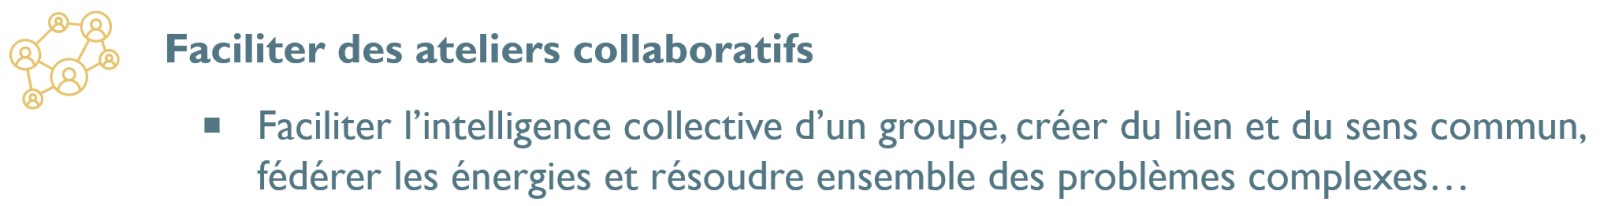 Formation - Faciliter des ateliers collaboratifs / d'intelligence collective